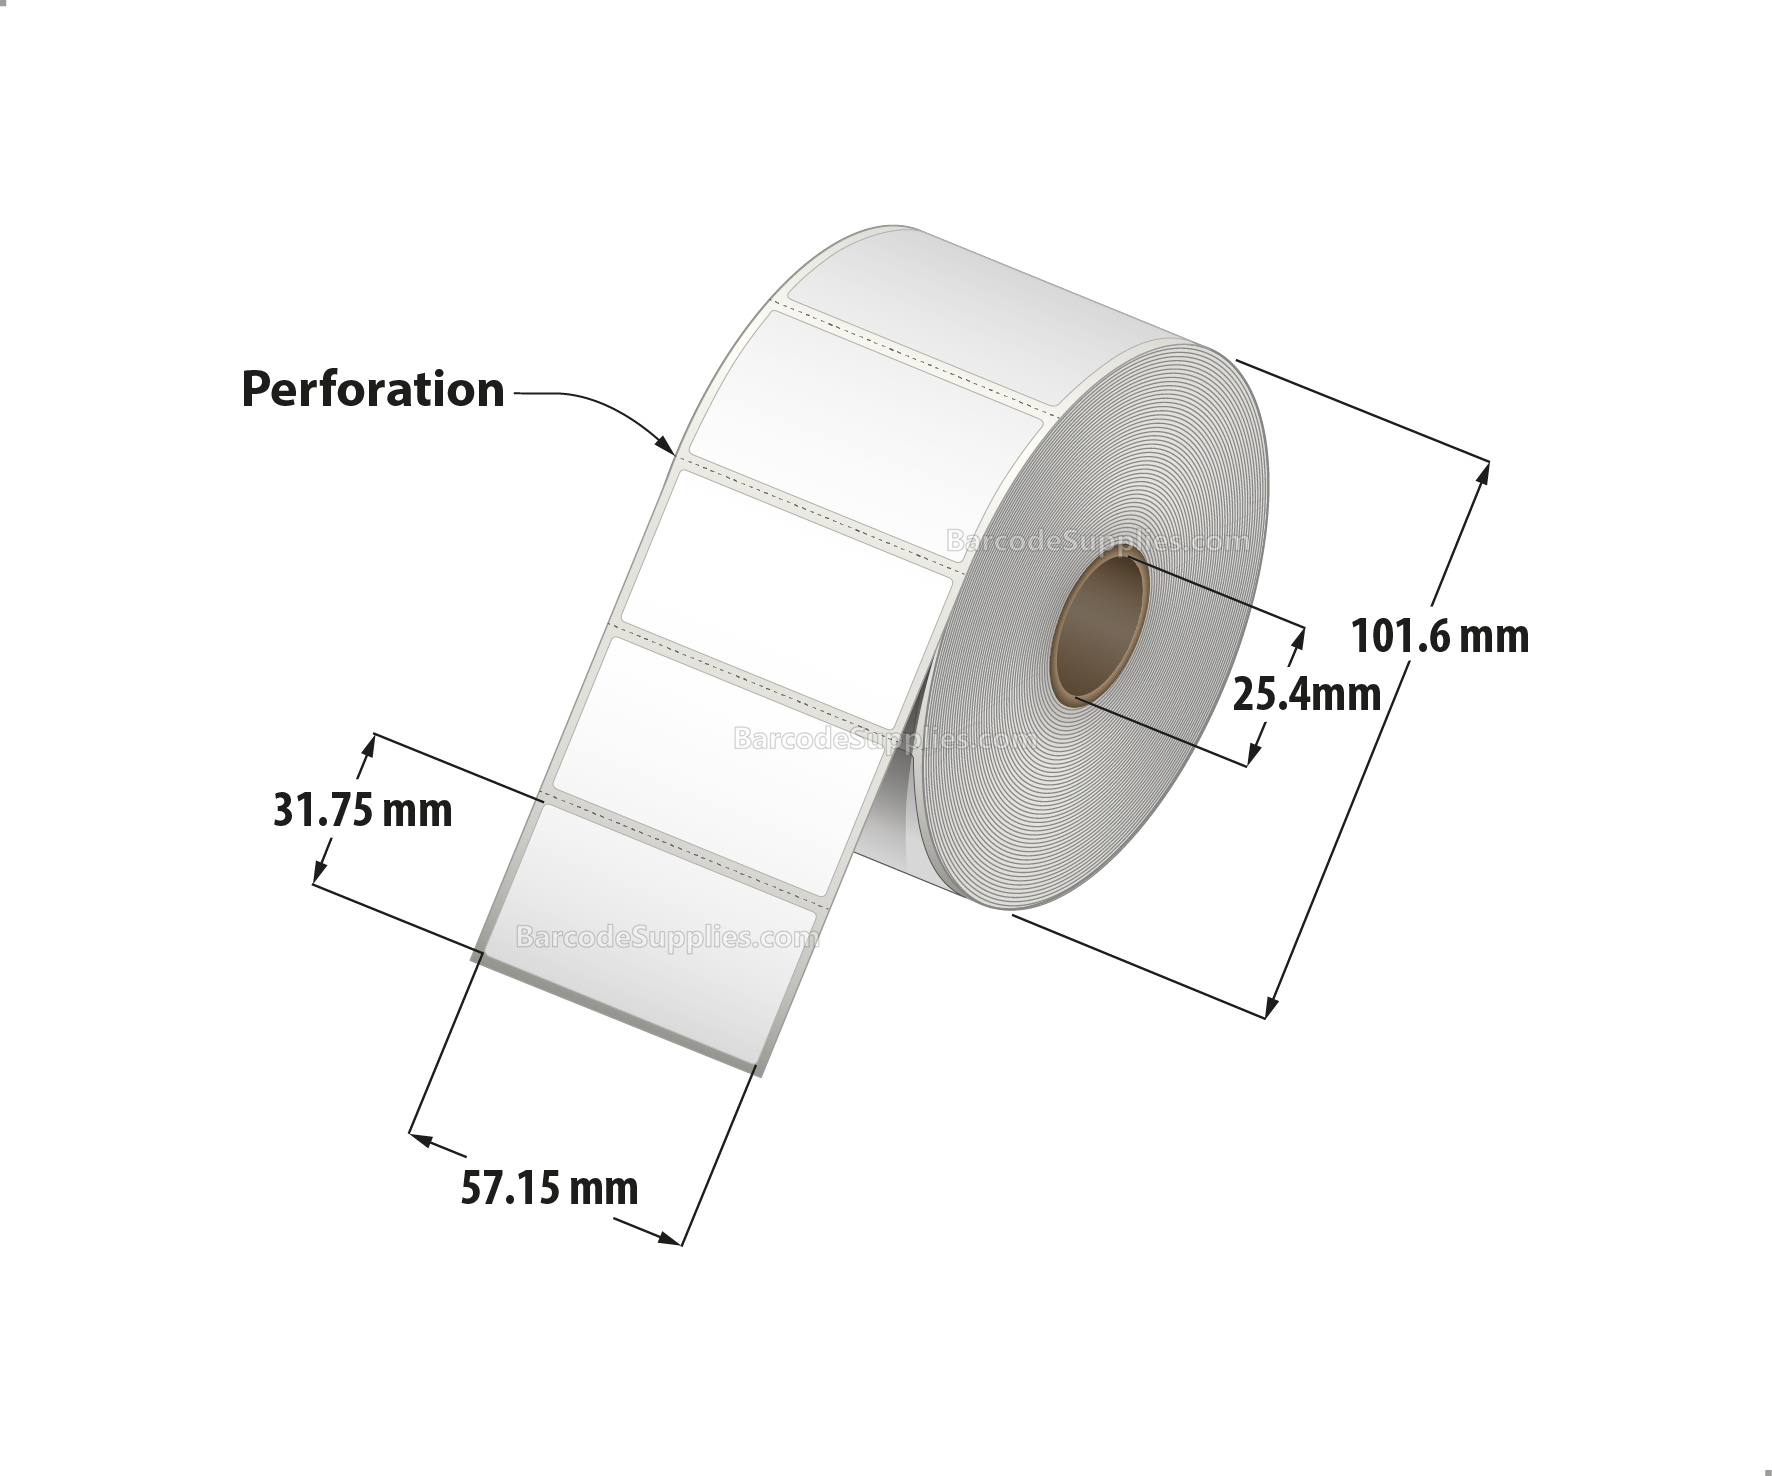 2.25 x 1.25 Direct Thermal White Labels With Rubber Adhesive - Perforated - 1135 Labels Per Roll - Carton Of 12 Rolls - 13620 Labels Total - MPN: RDT4-225125-1P